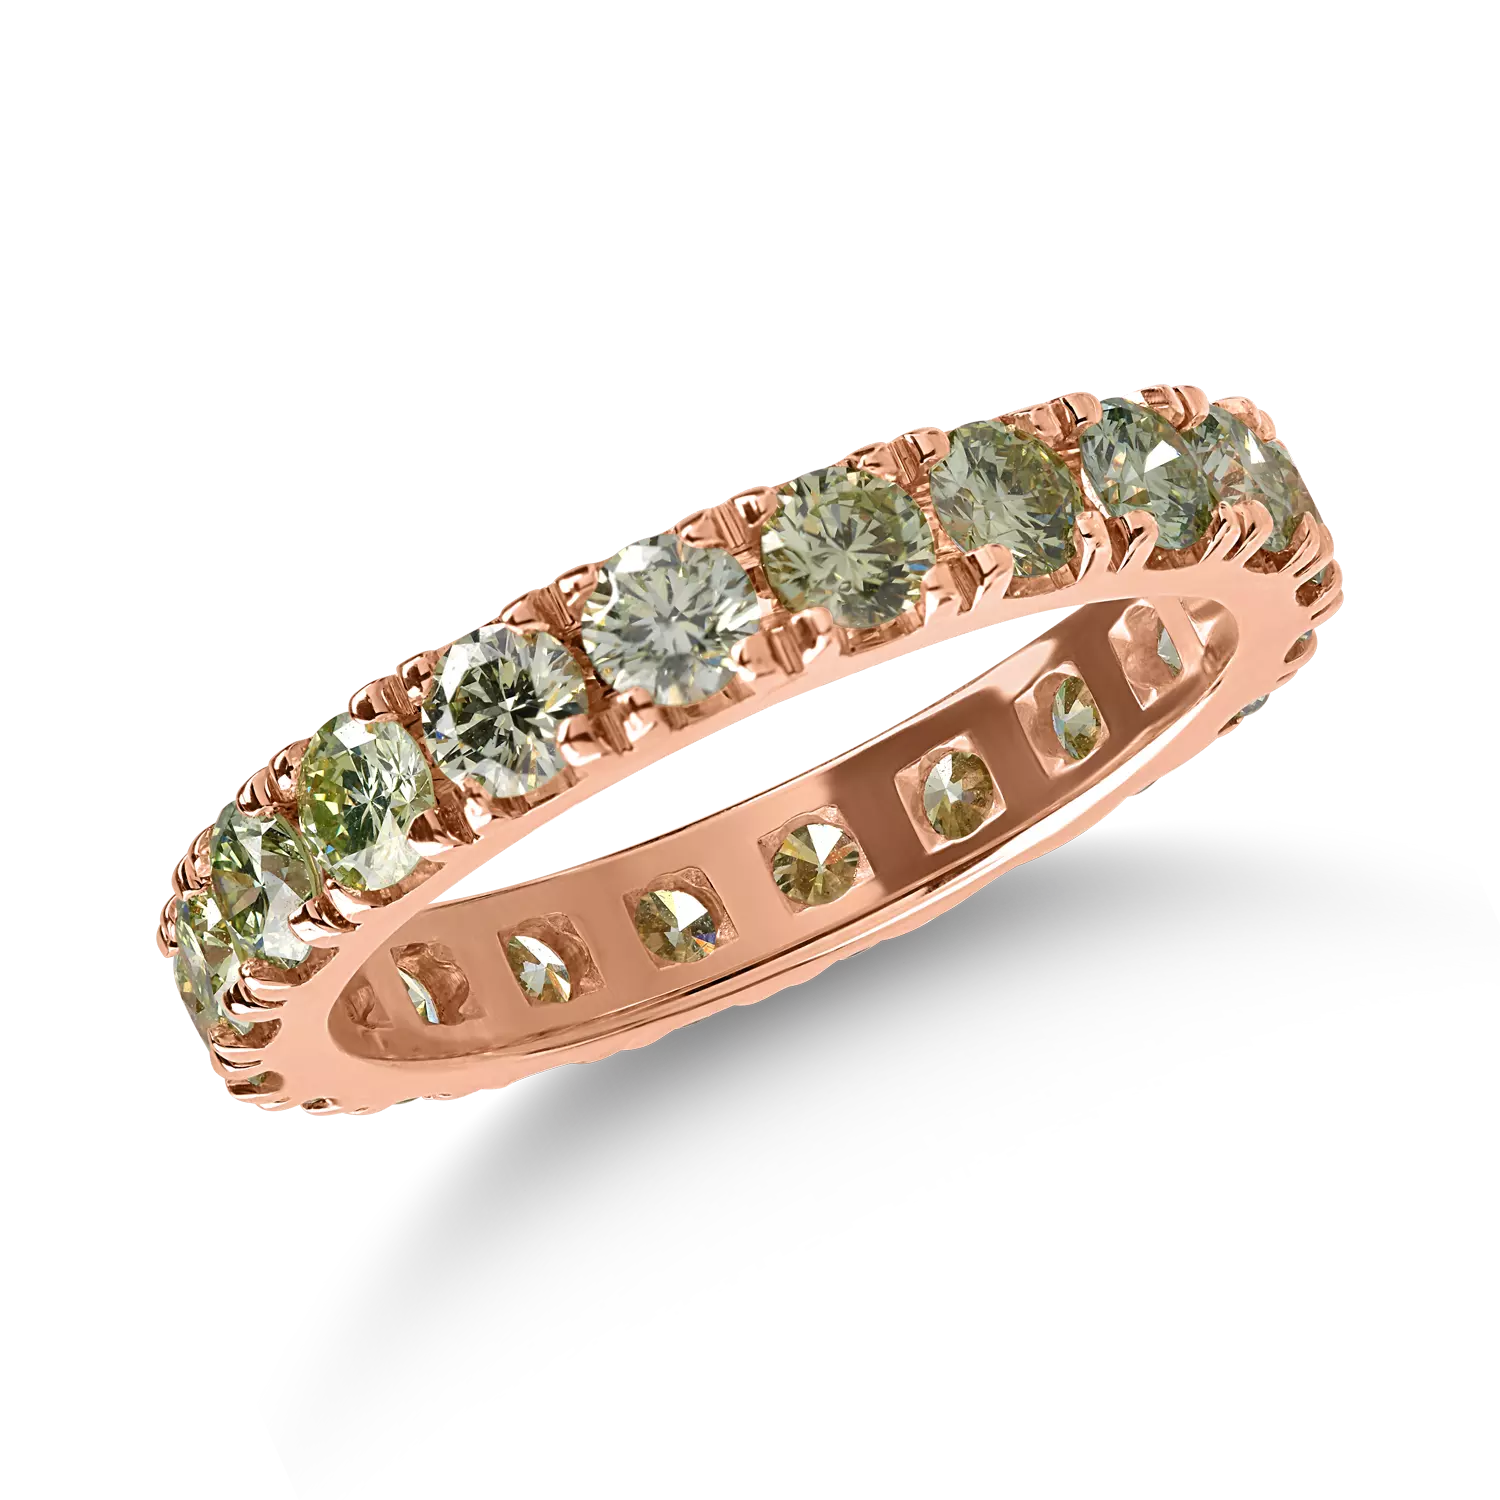 Eternity ring in rose gold with 2.62ct green diamonds